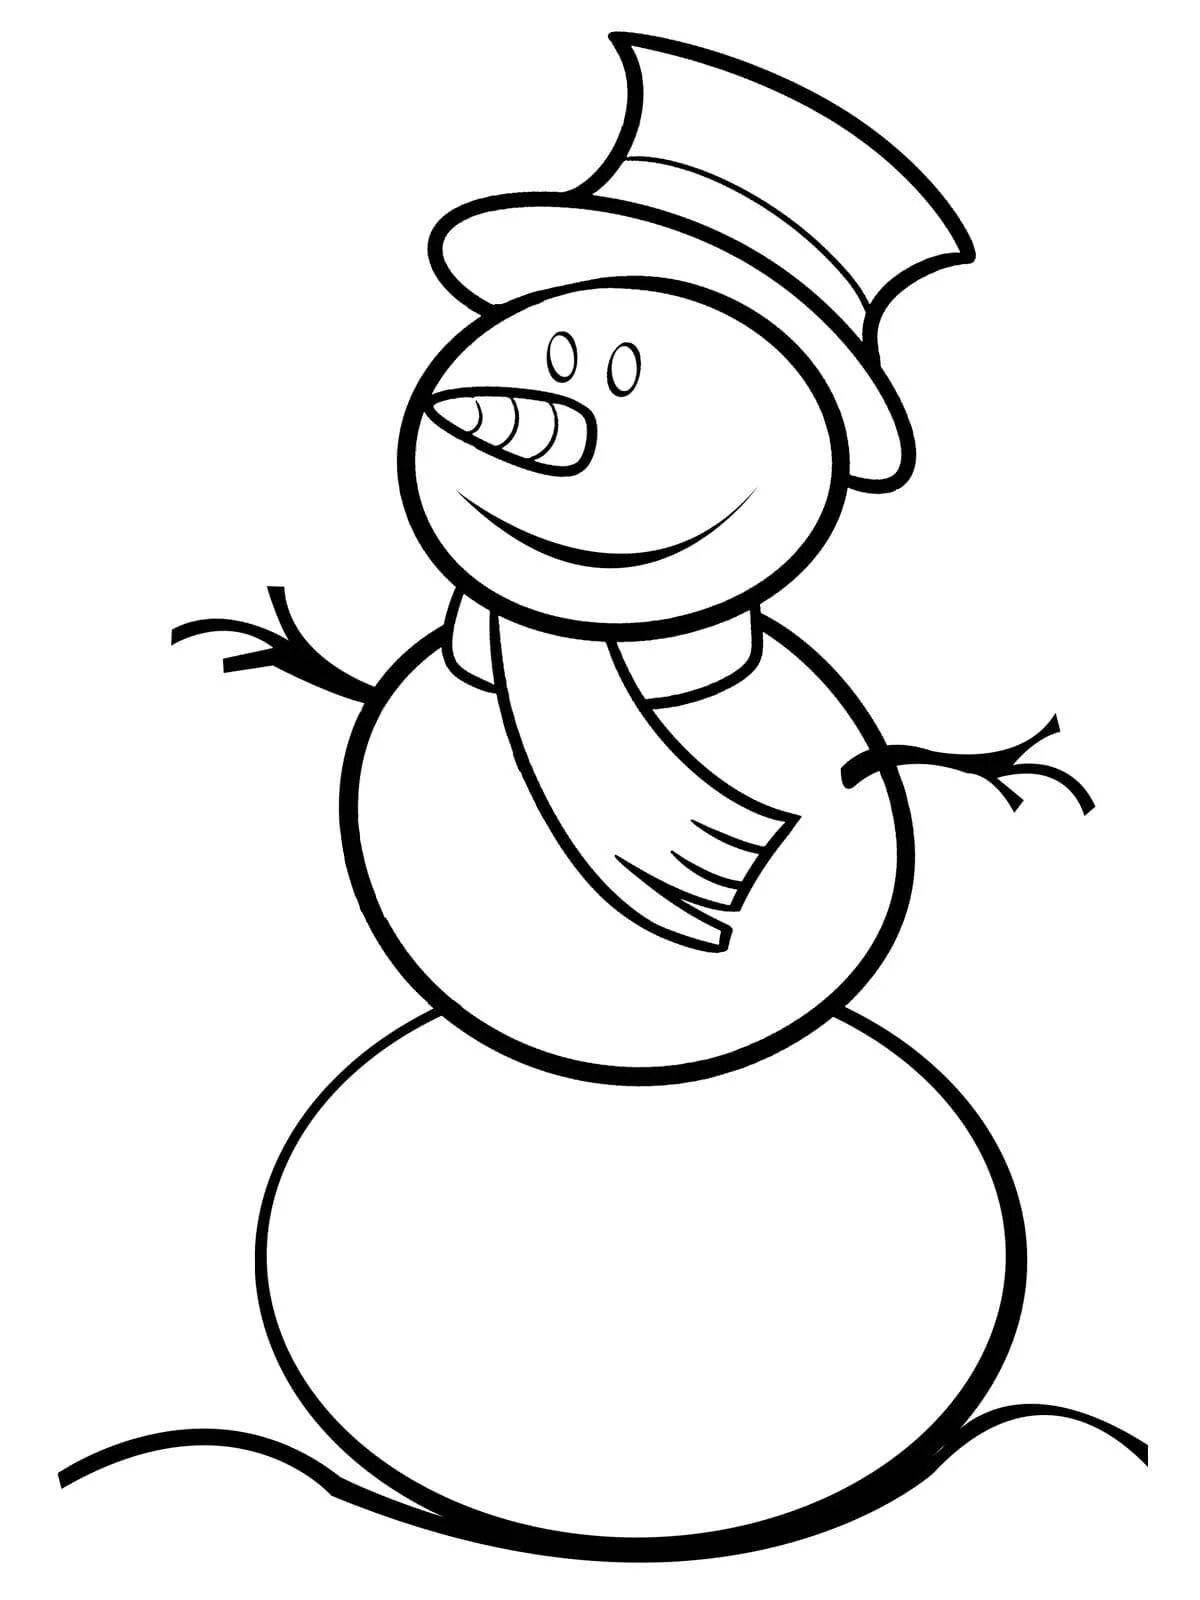 Playtime snowman coloring for kids